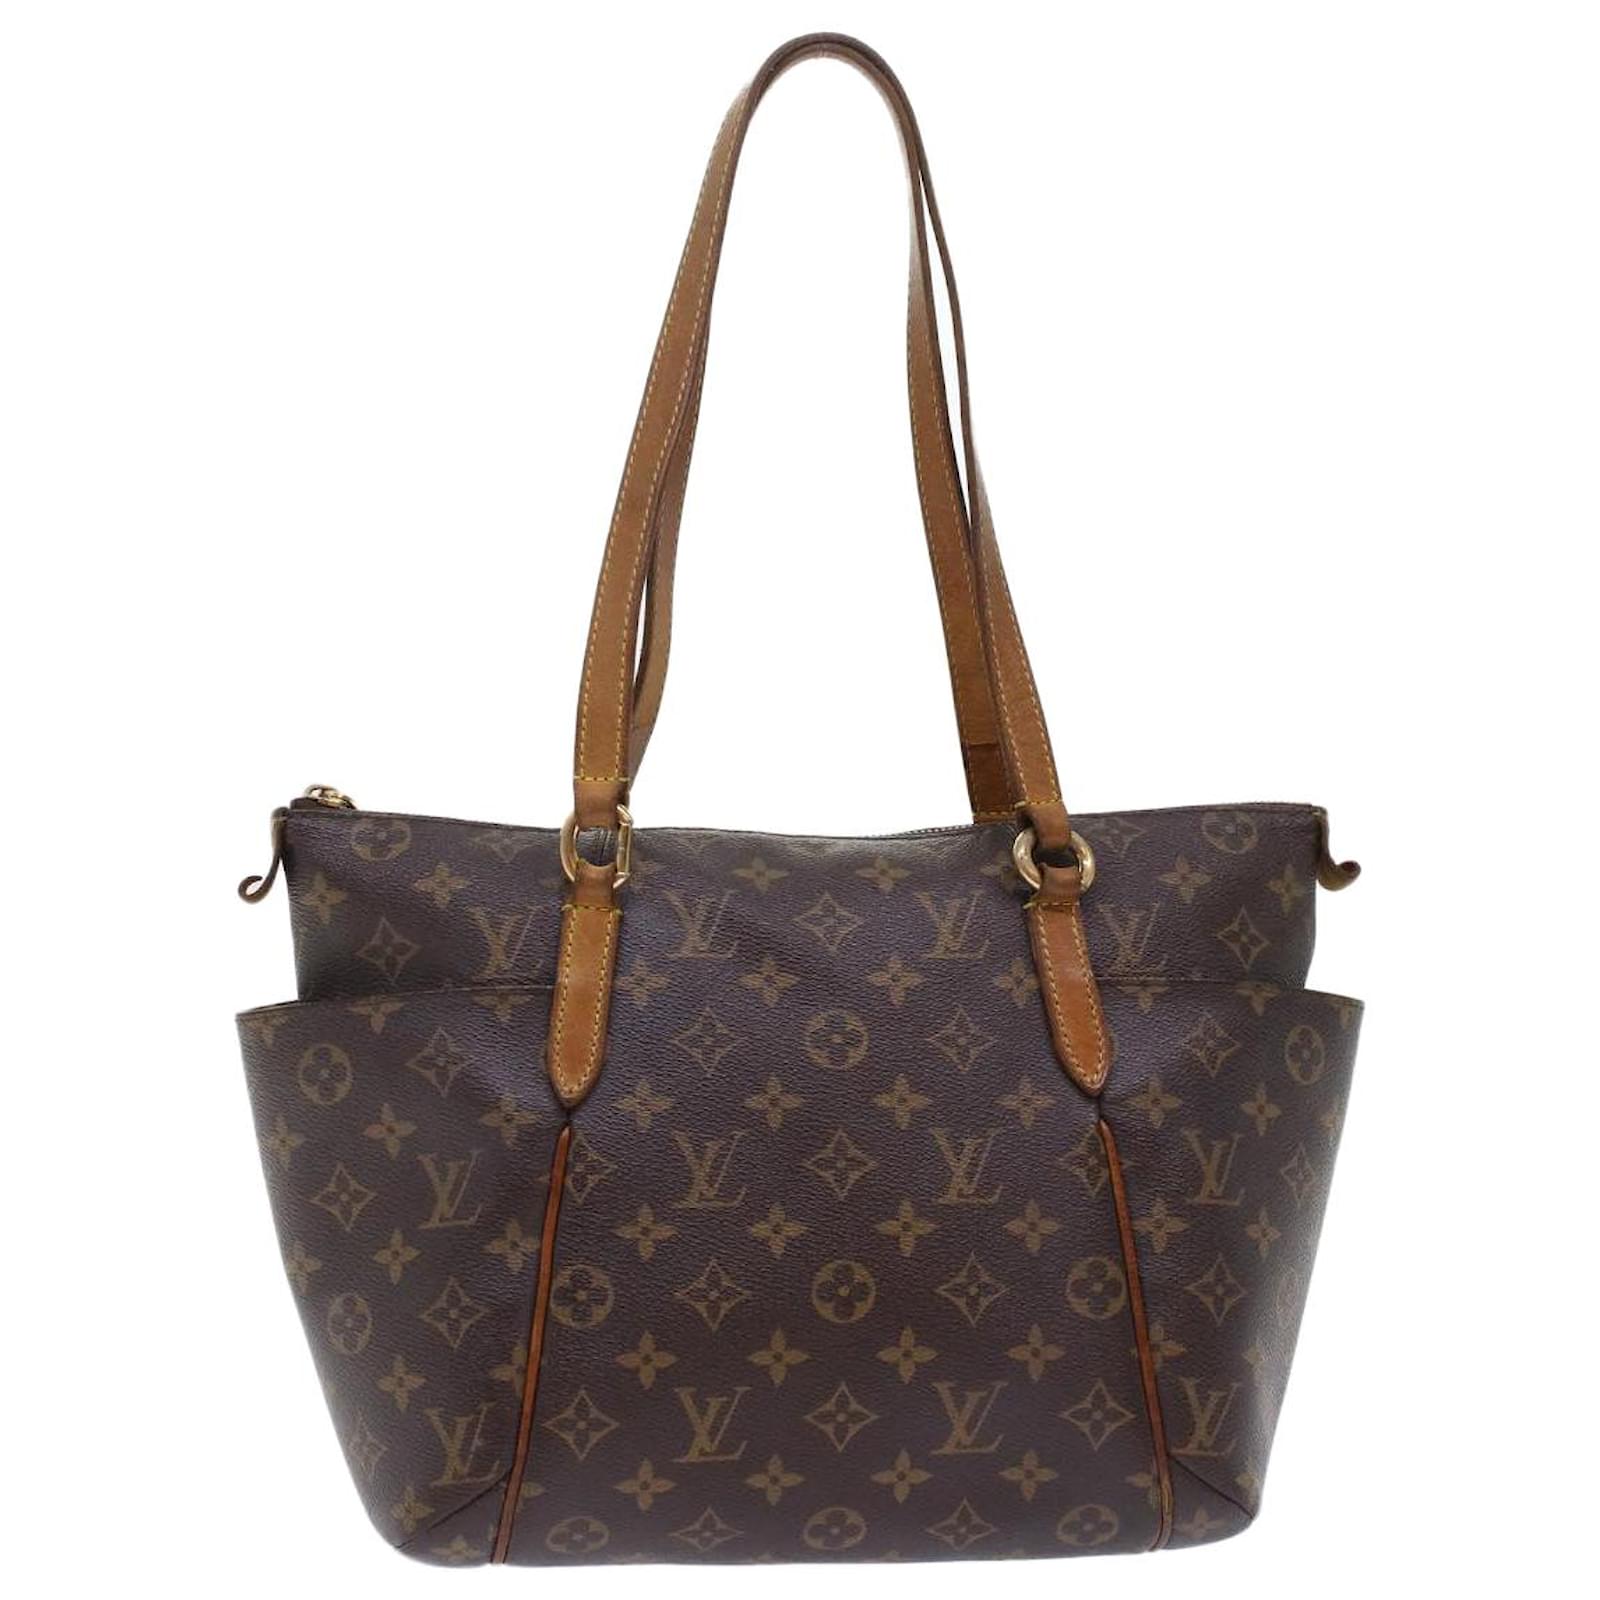 LOUIS VUITTON 2003 Lv Cup Limited Edition Grey Vinyl Large Tote